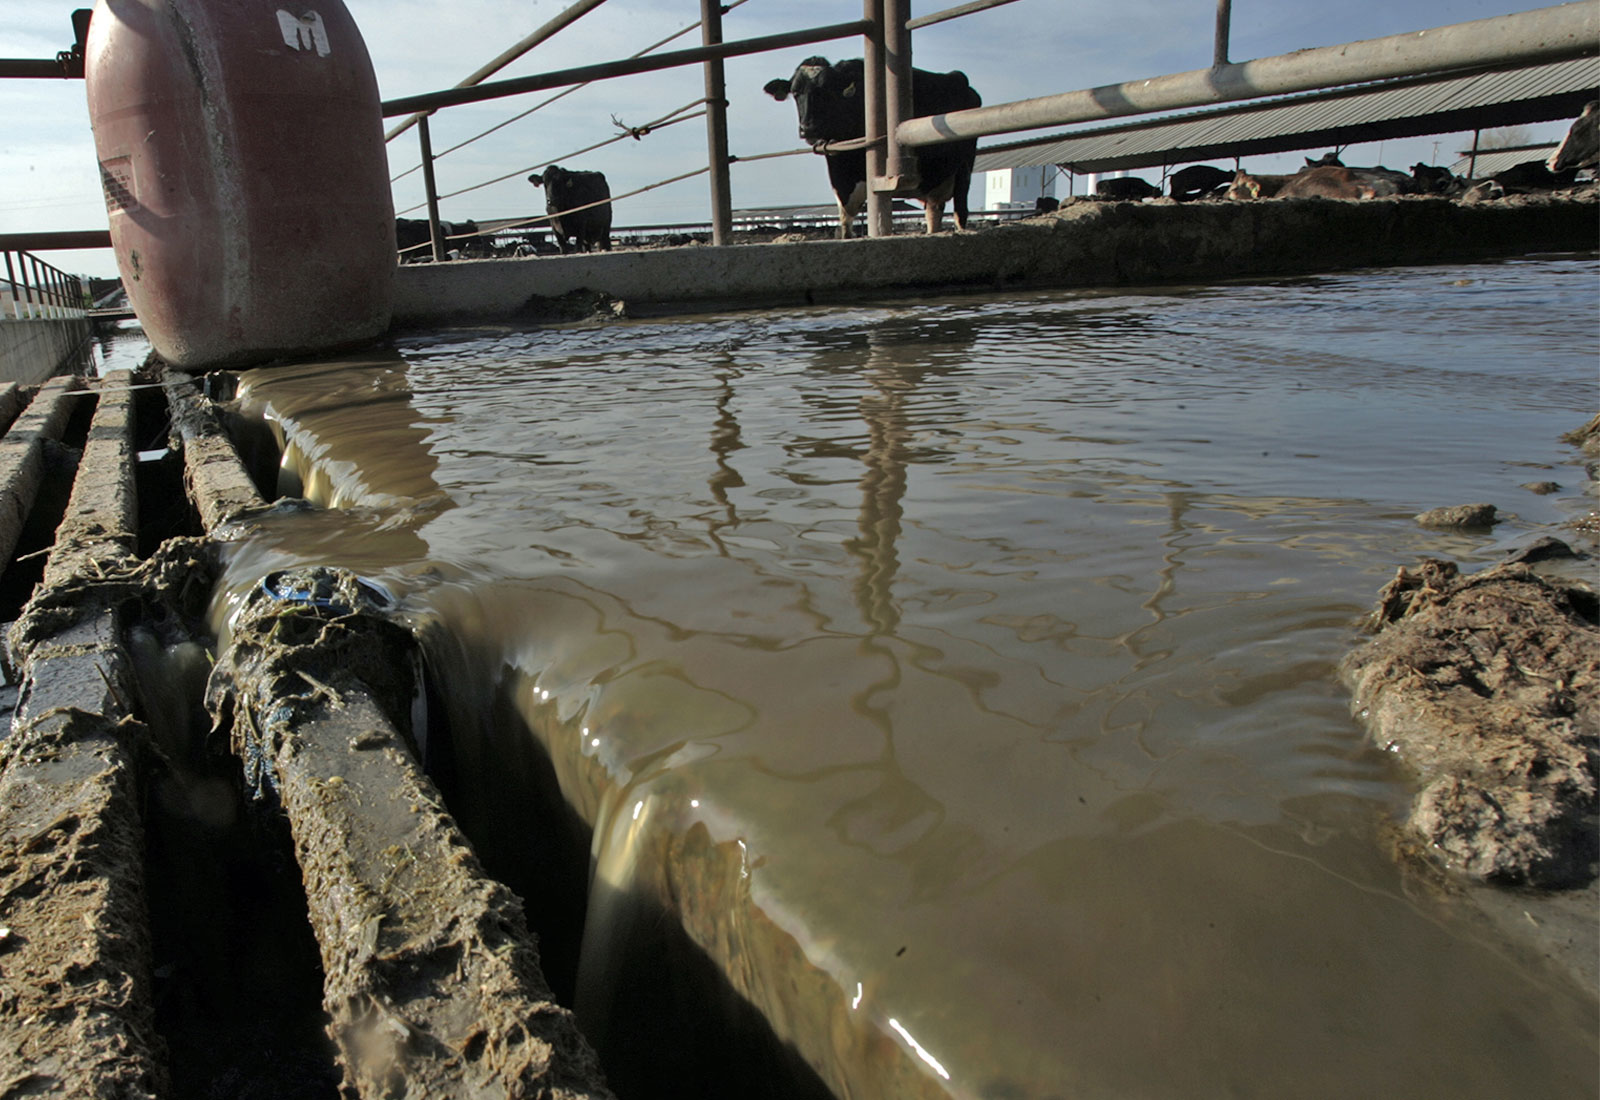 Low angle view of liquid manure draining into a grate with cows watching from a distance